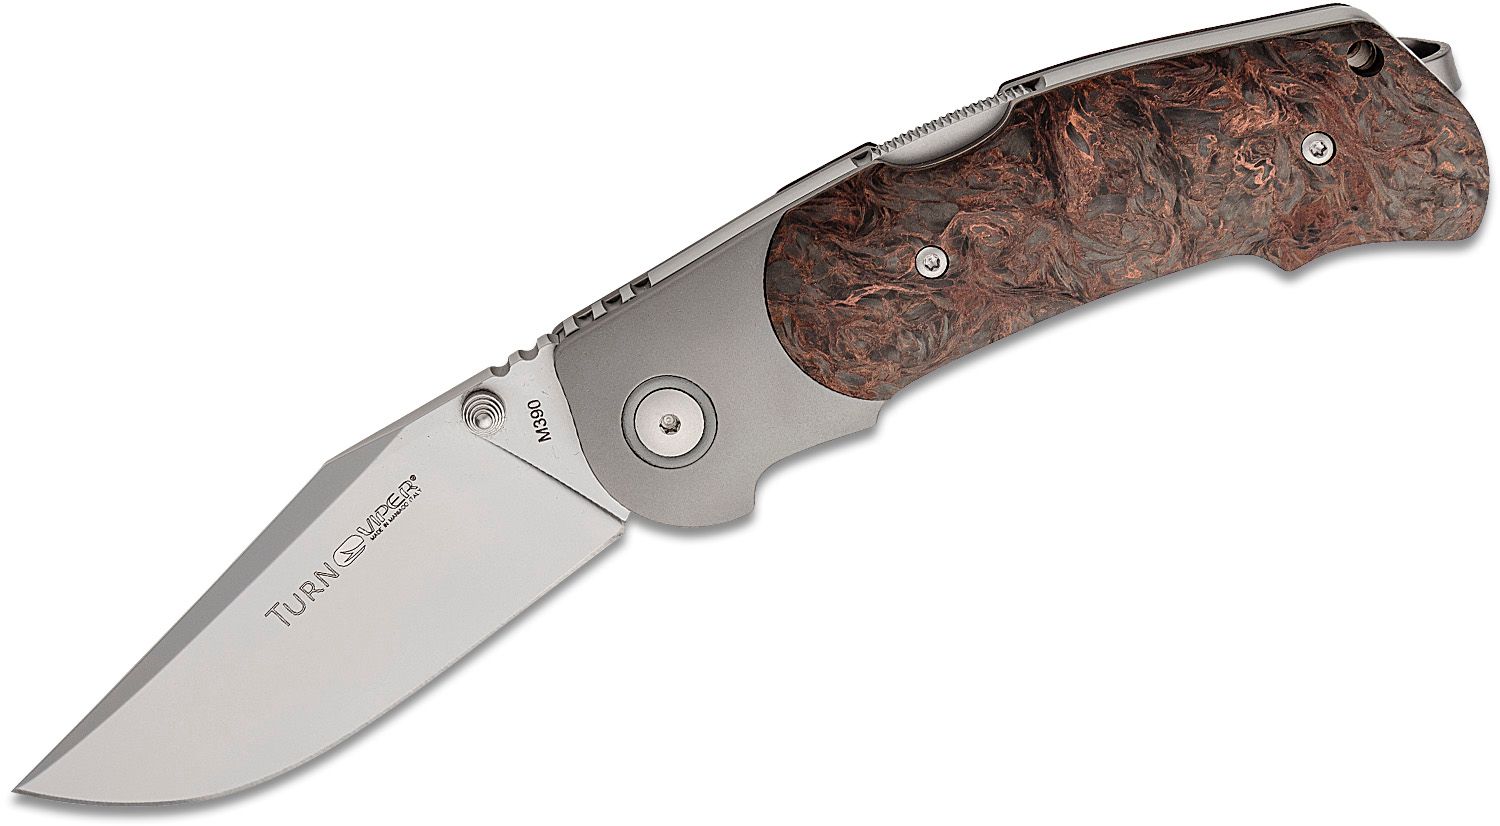 Viper Knives Limited Edition Turn Folding Knife 3.23 M390 Bead Blasted  Clip Point Blade, Bolstered Titanium Handles with Copper Dark Matter  FatCarbon Scales - KnifeCenter - V5986FCC